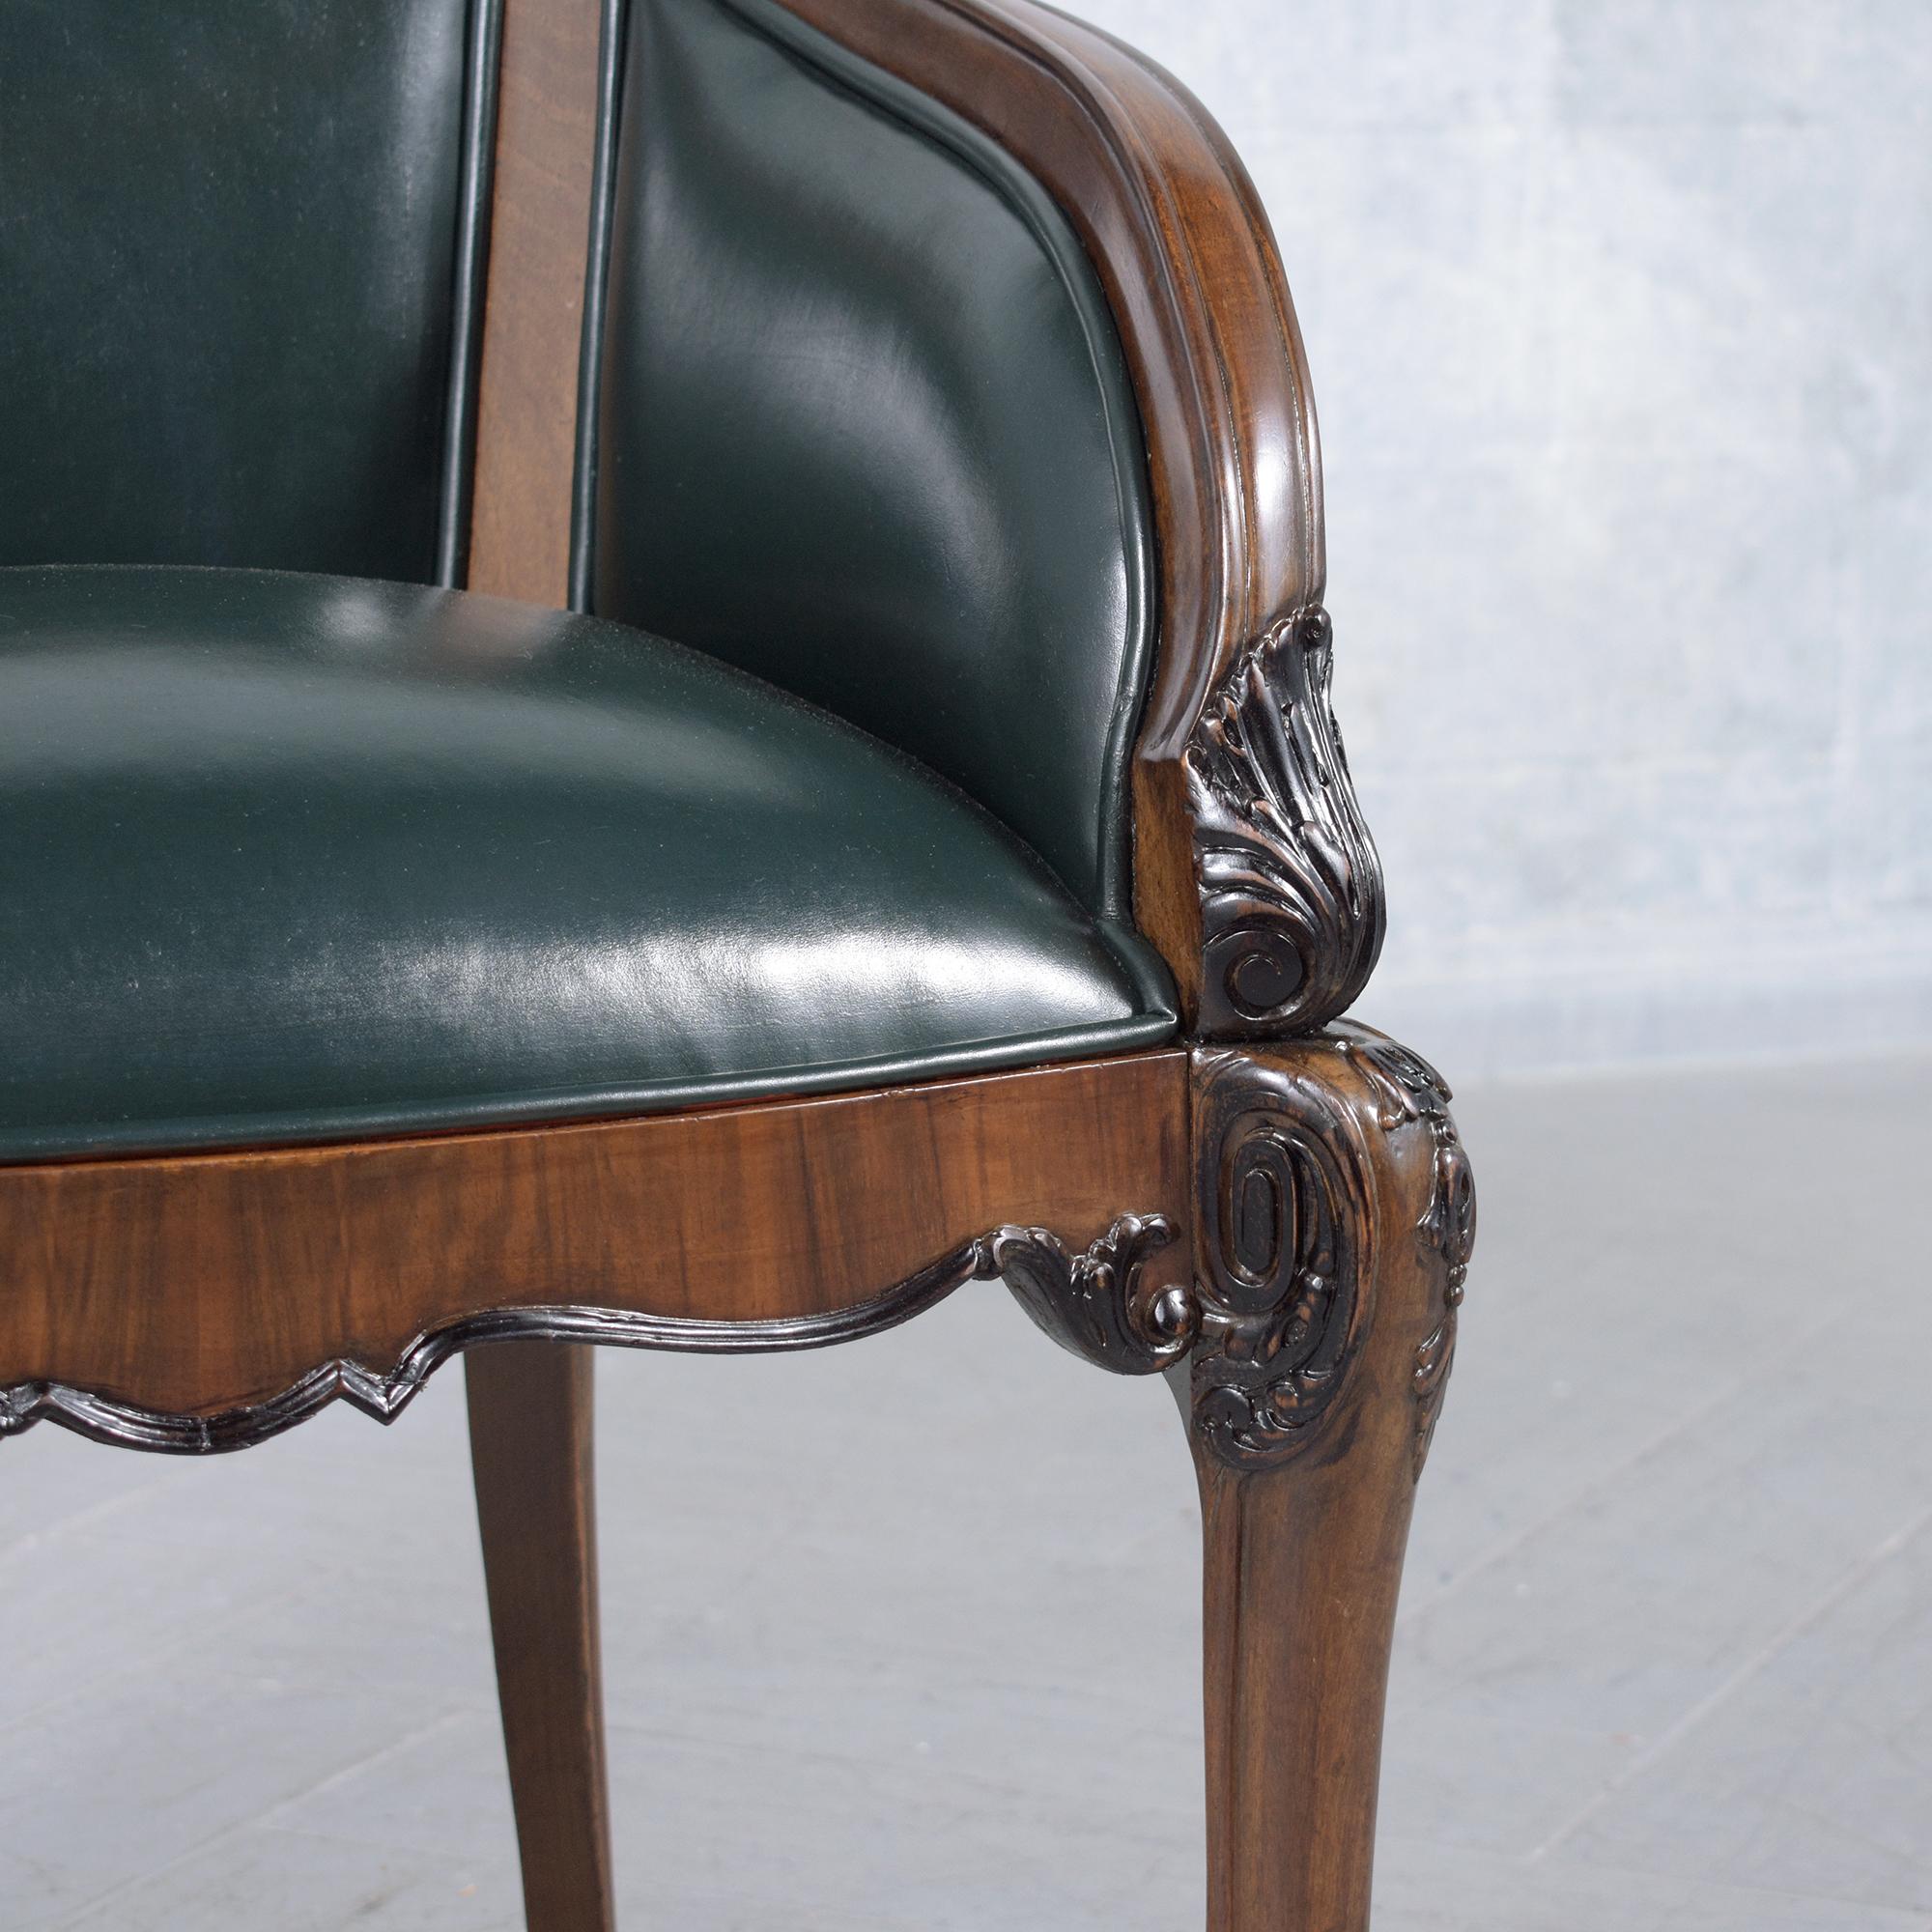 19th-Century English Chinoiserie Bergères: Restored Elegance in Green Leather For Sale 8